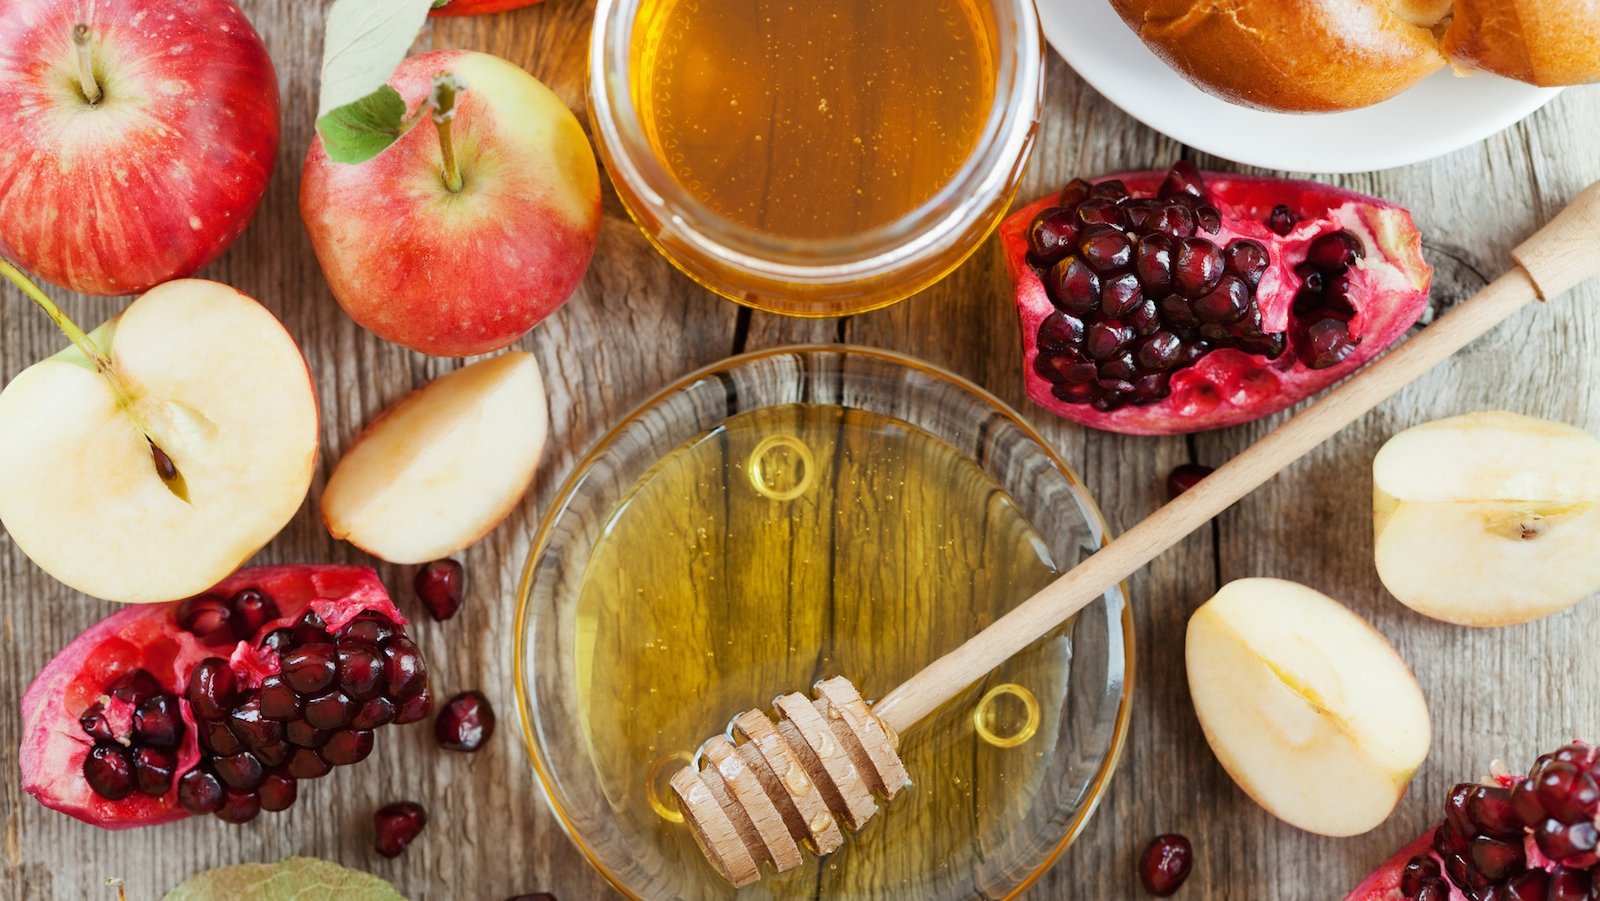 Delicious Rosh Hashanah Recipes to Celebrate the Jewish New Year